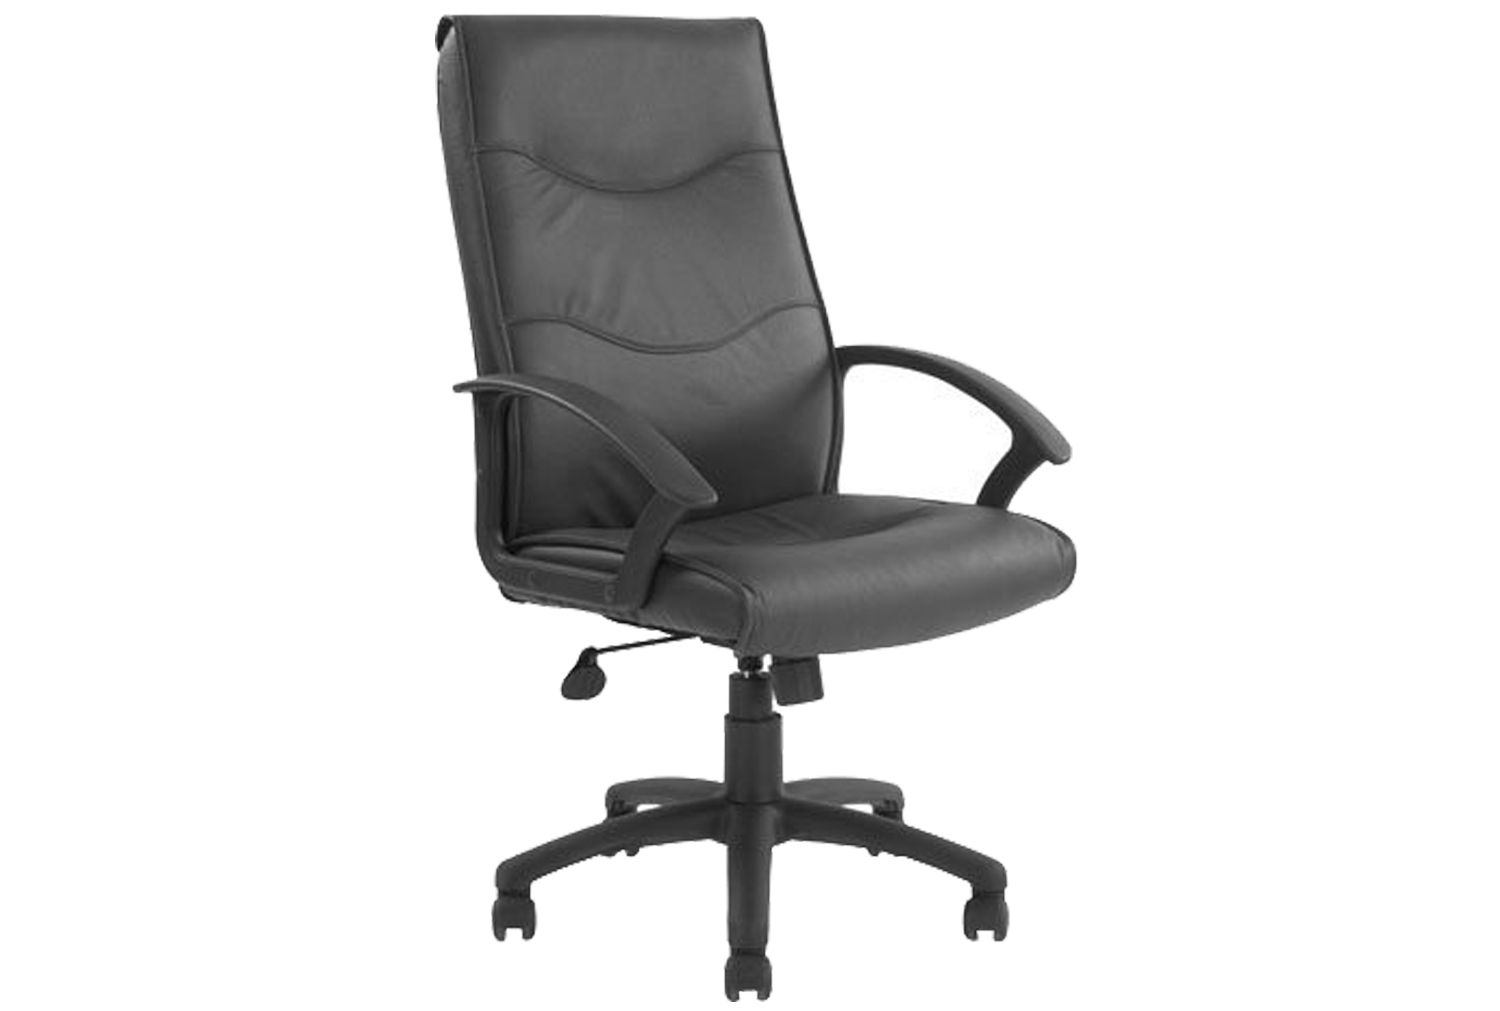 Corbett High Back Leather Faced Office Chair (Black), Fully Installed